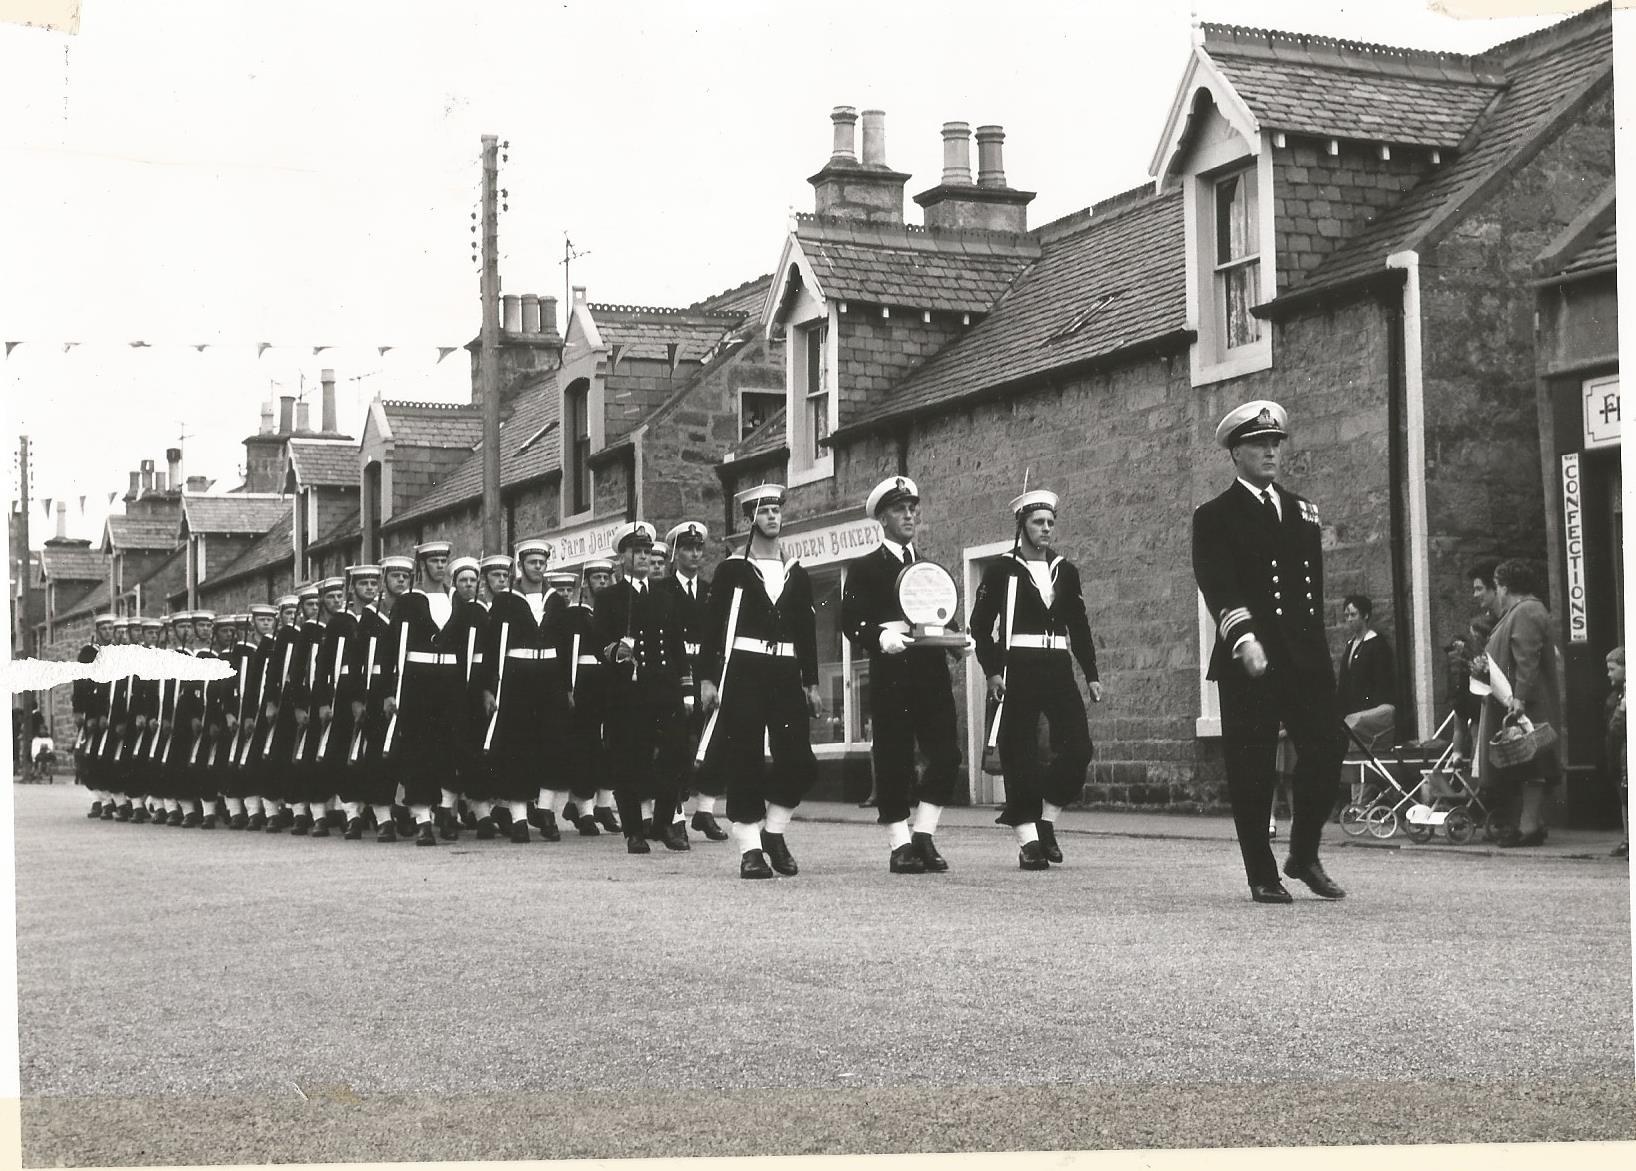 HMS Fulmar personnel parade along Lossiemouth's Queen Street in 1967